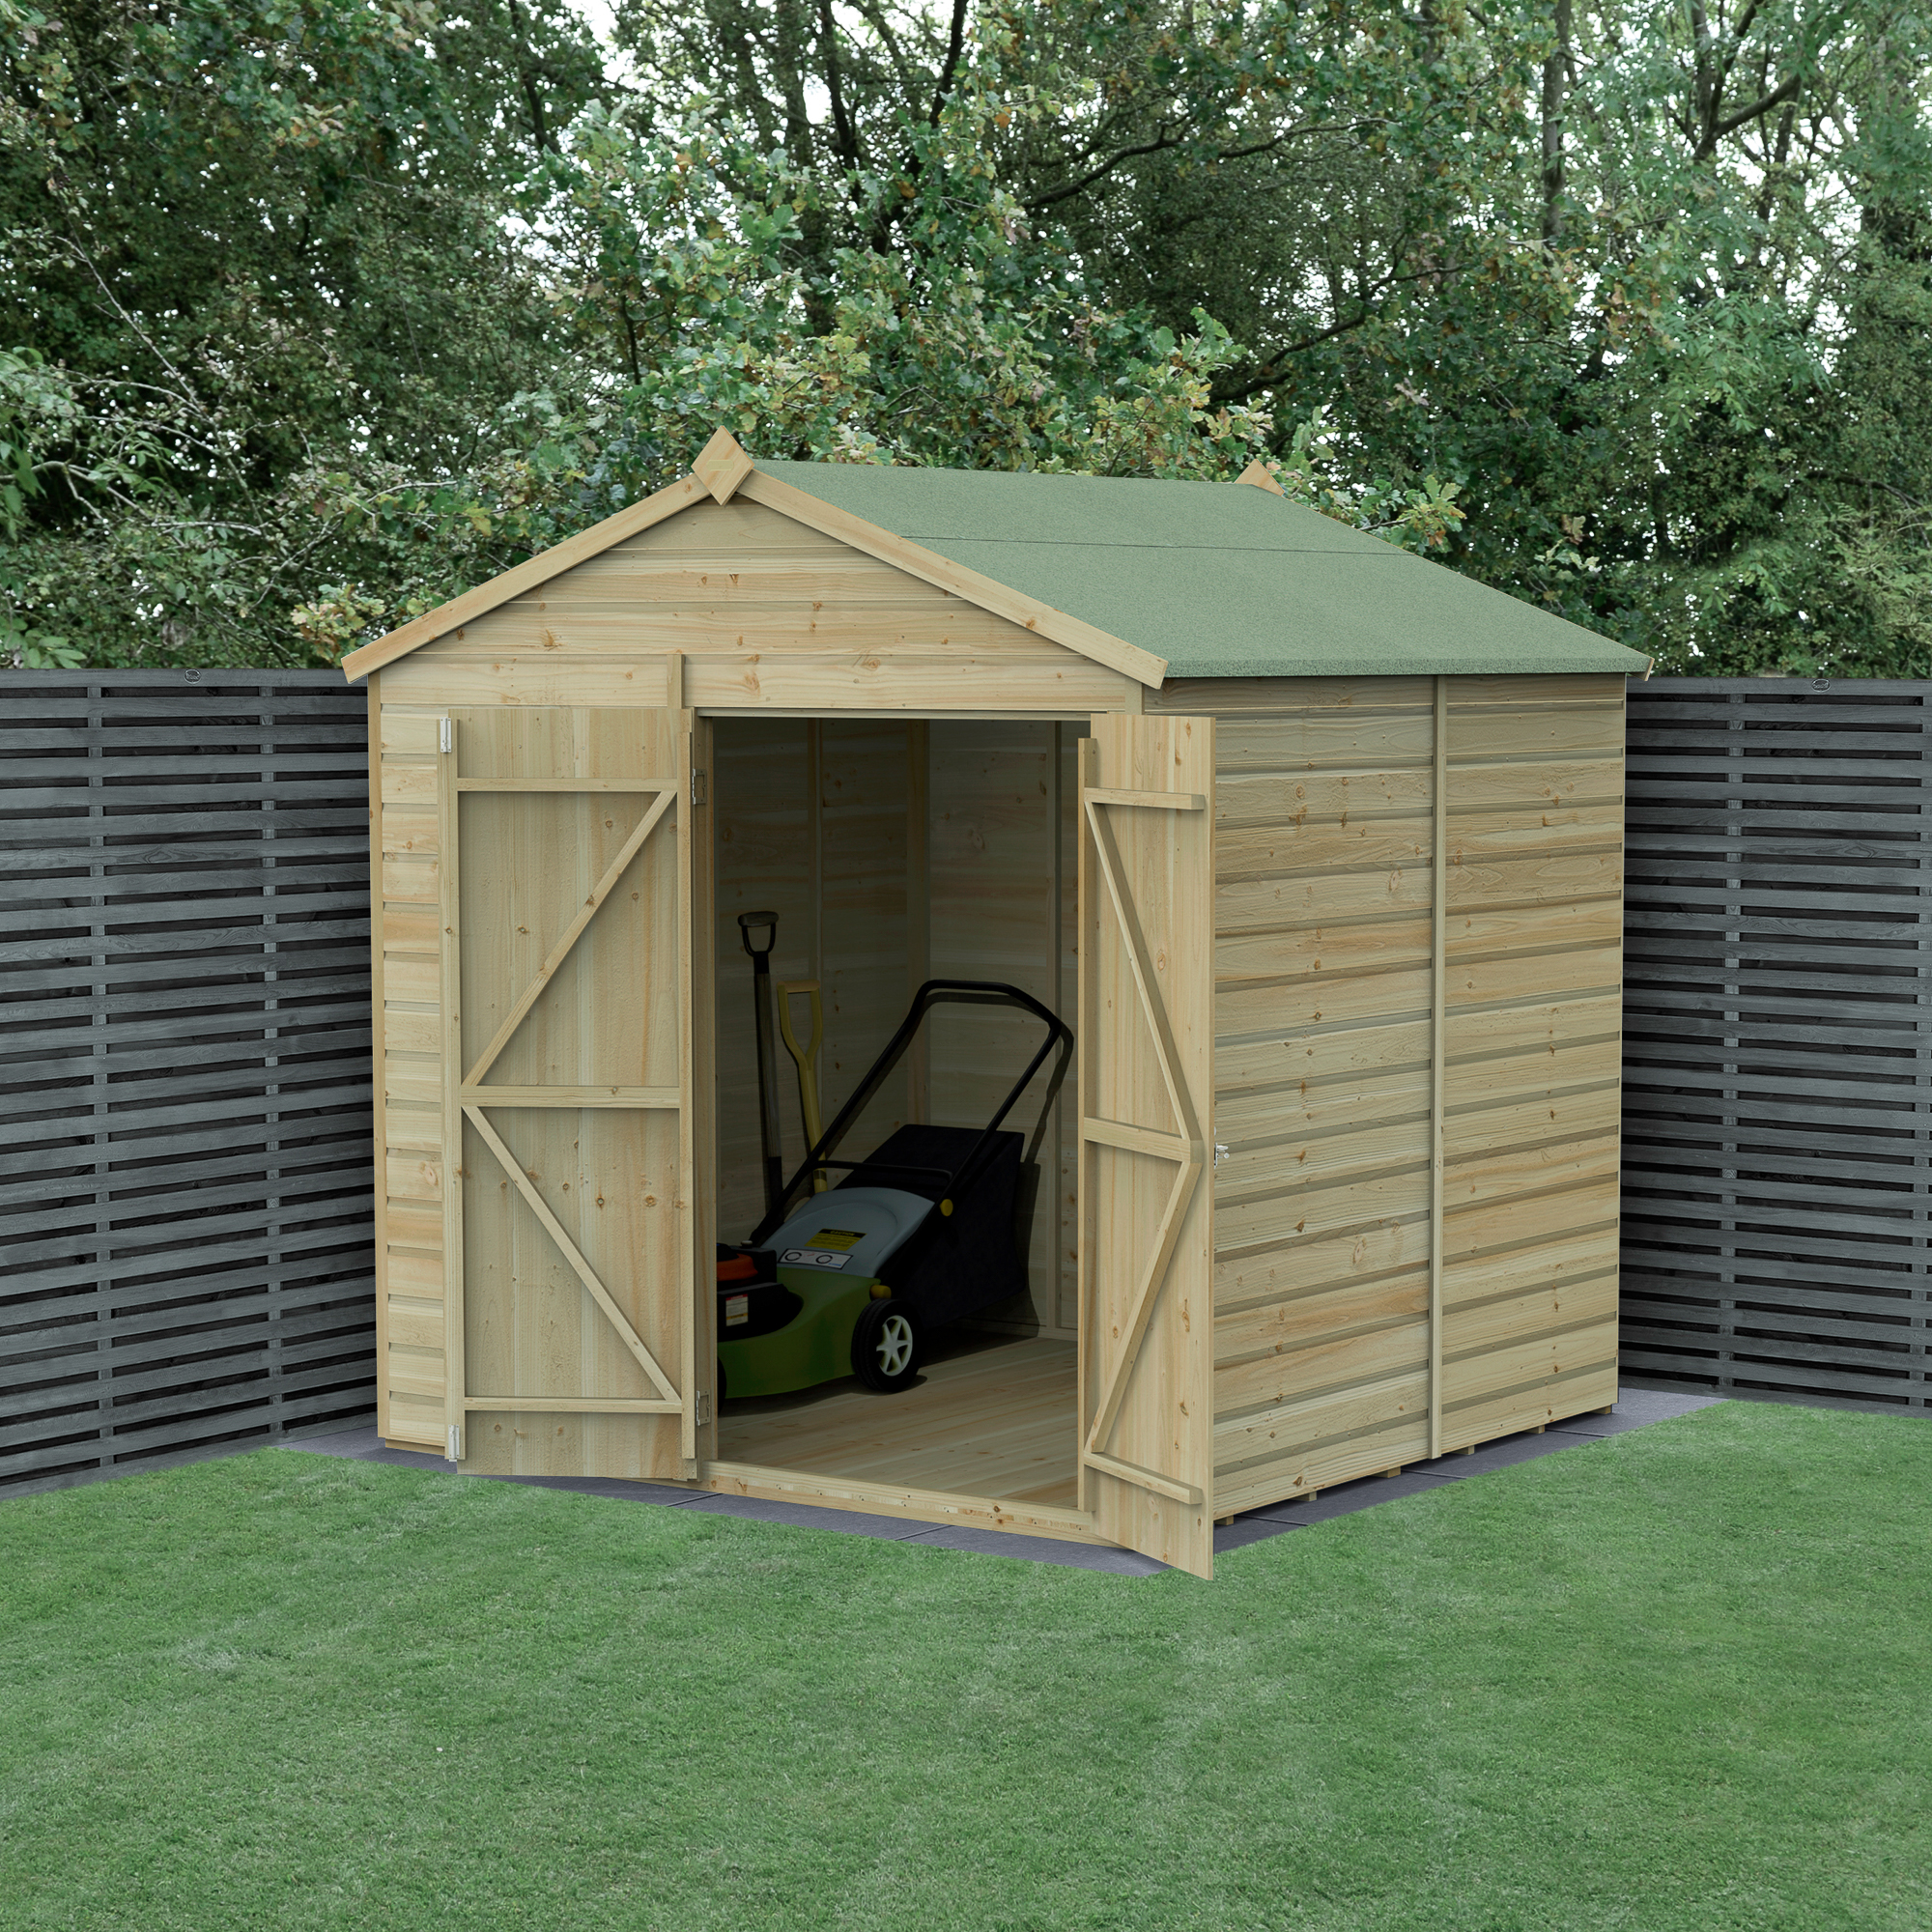 Forest Garden Beckwood 7 x 7ft Apex Shiplap Pressure Treated Double Door Windowless Shed